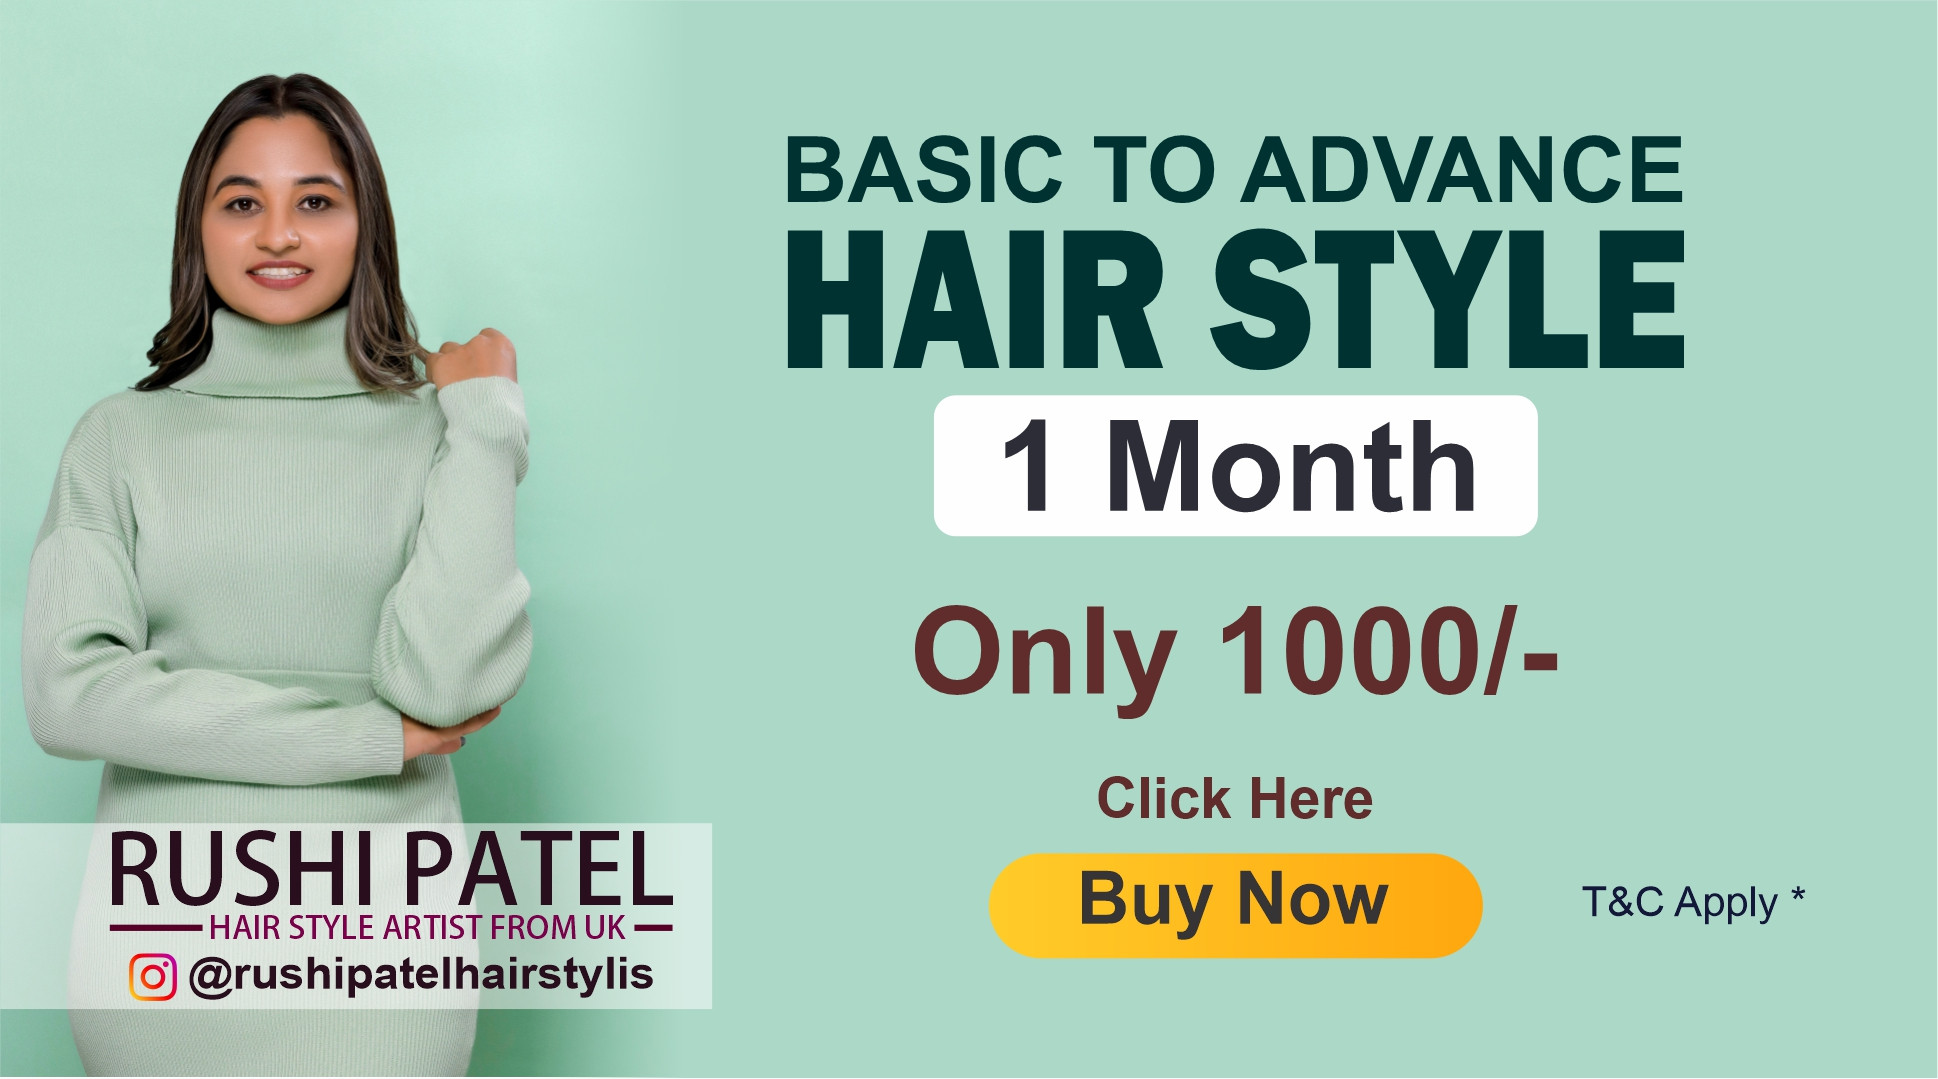 1 Month Hair Style by Rushi Patel